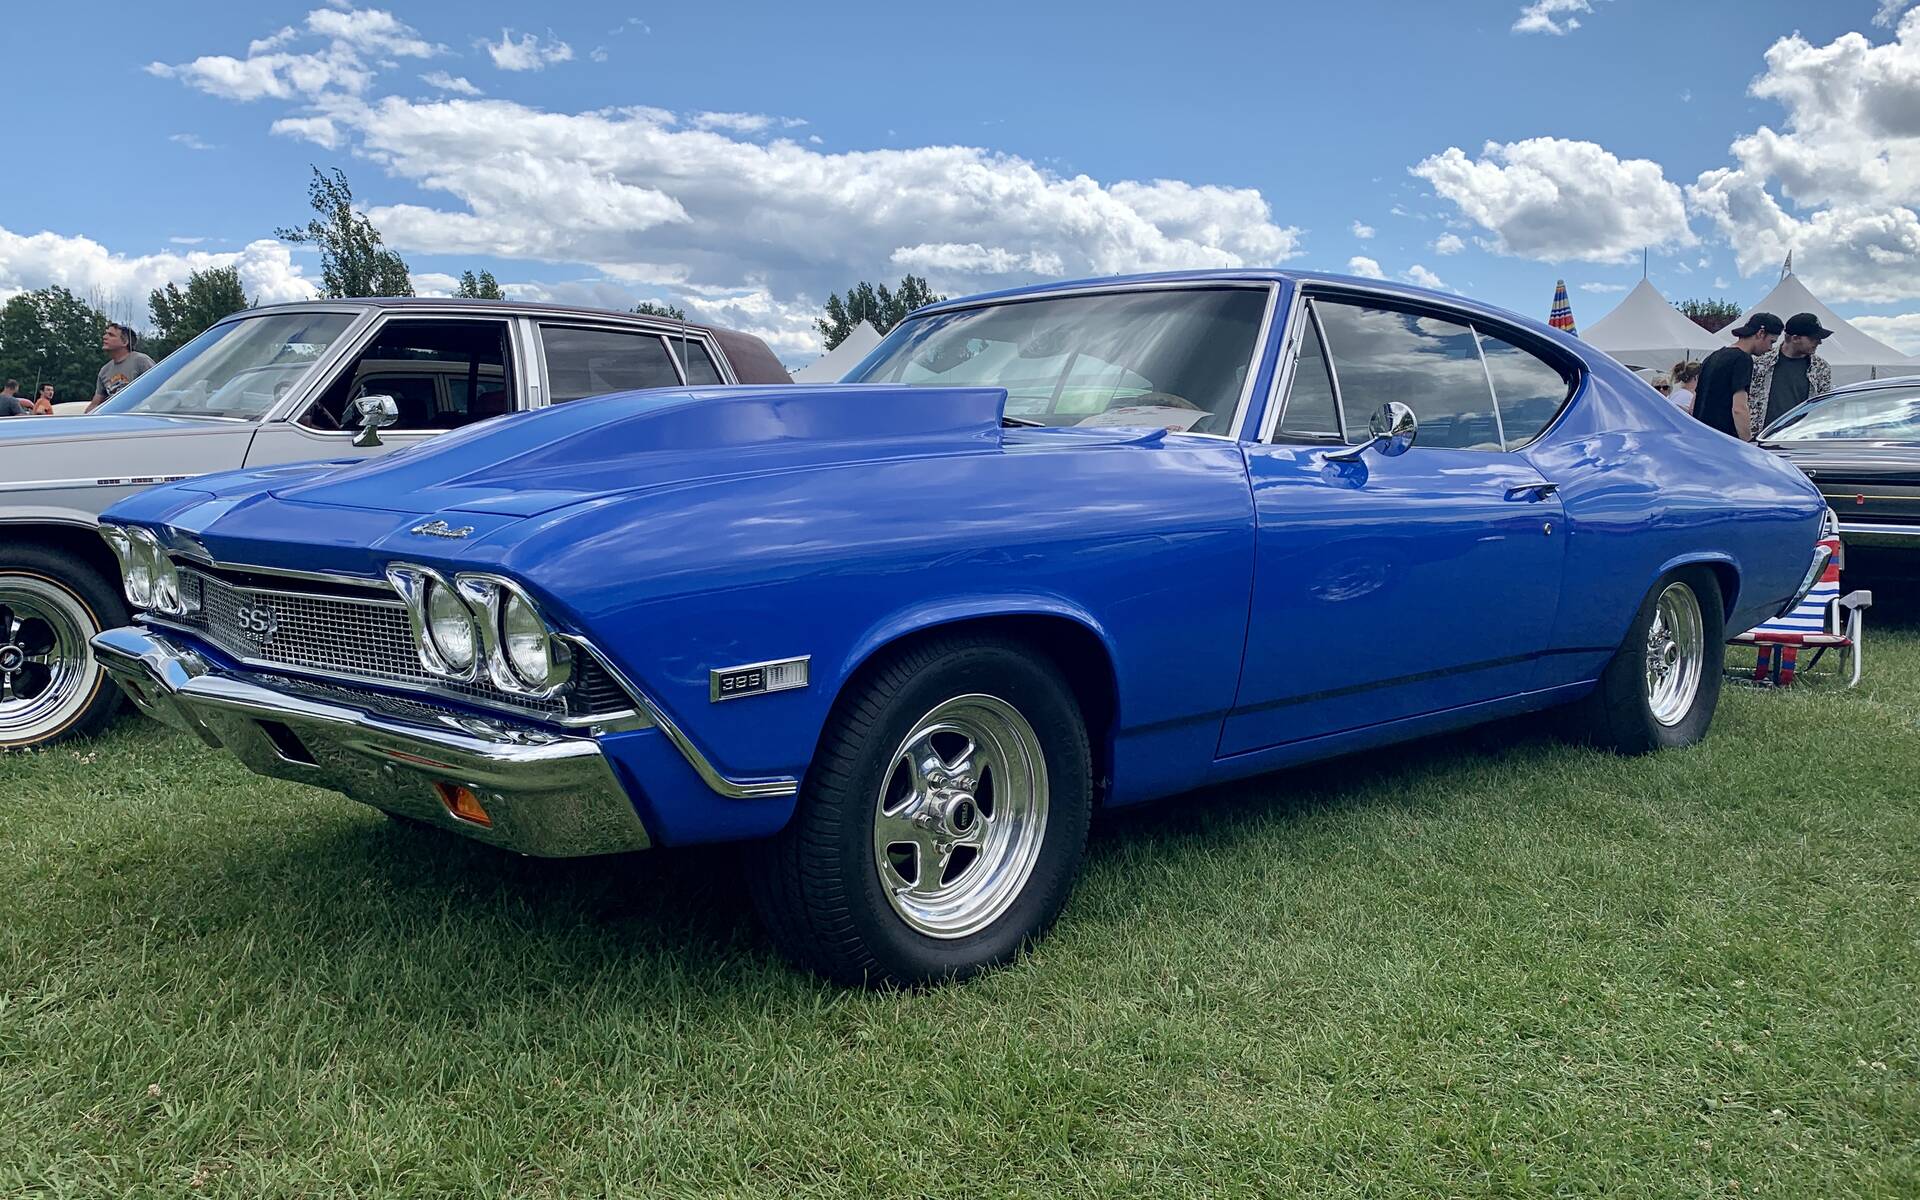 <p><strong>Chevrolet Chevelle 1968</strong></p>